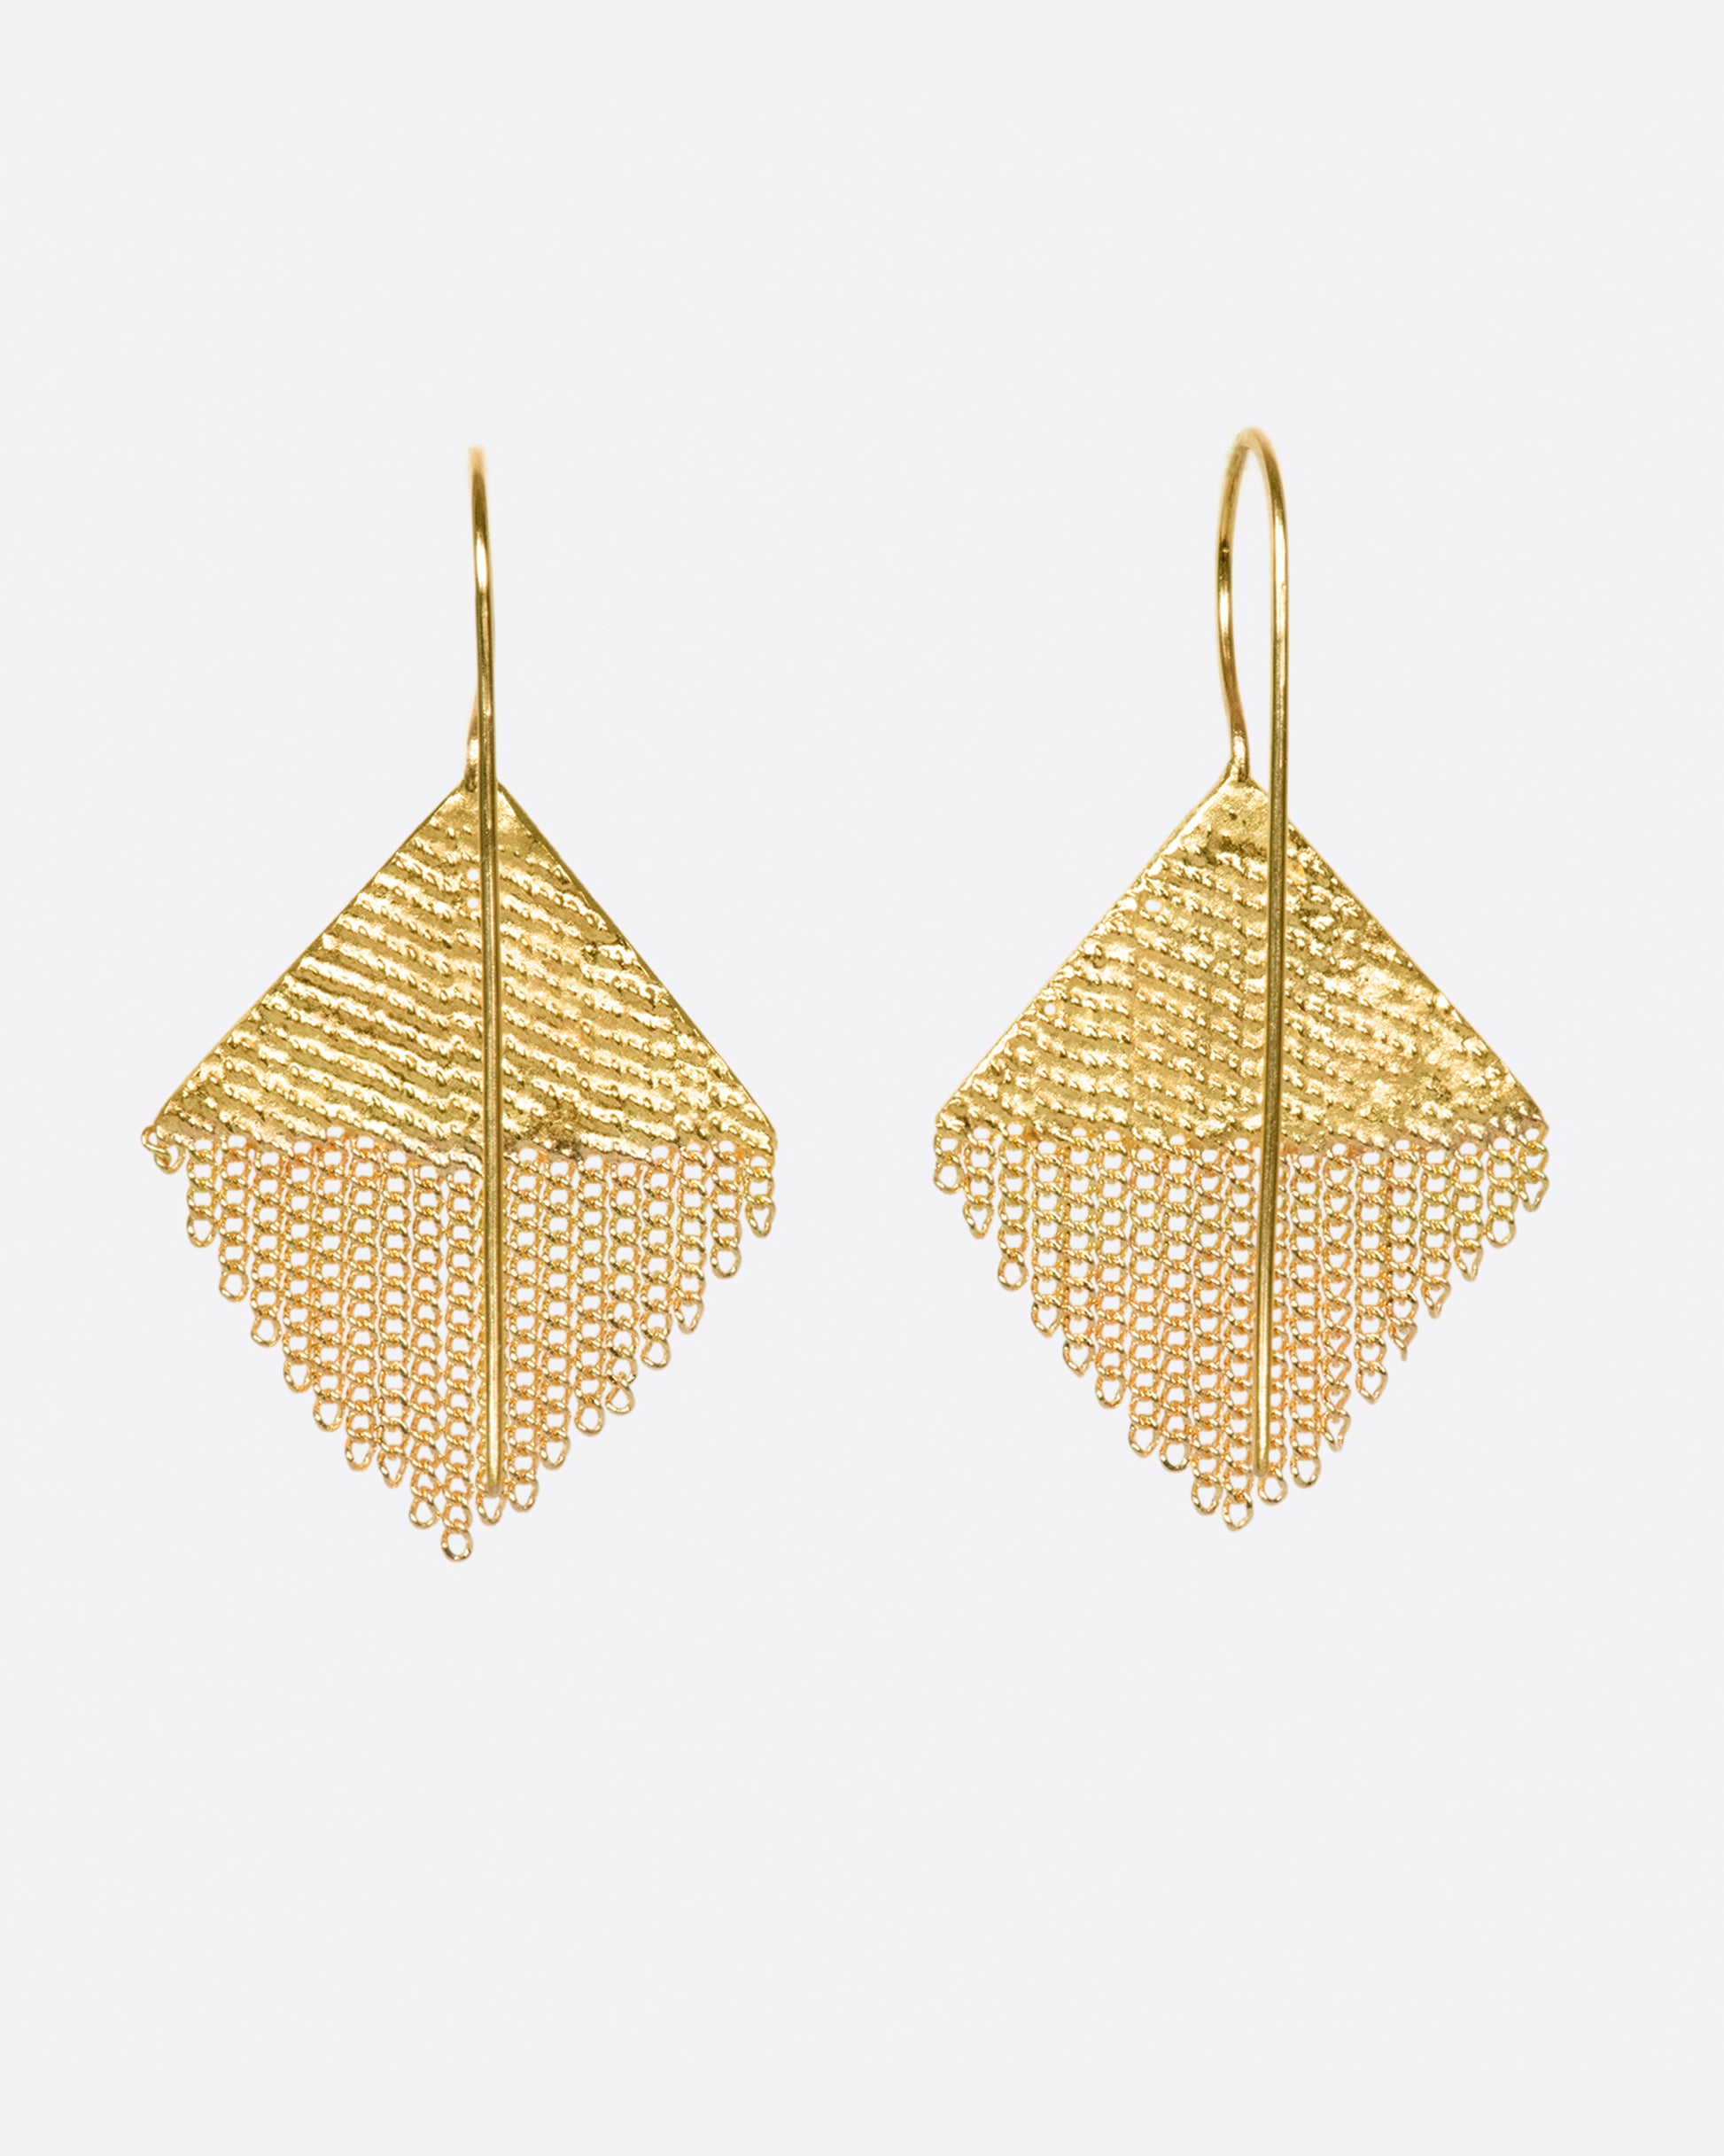 A pair of diamond-shaped gold earrings made from gold chain and solder.